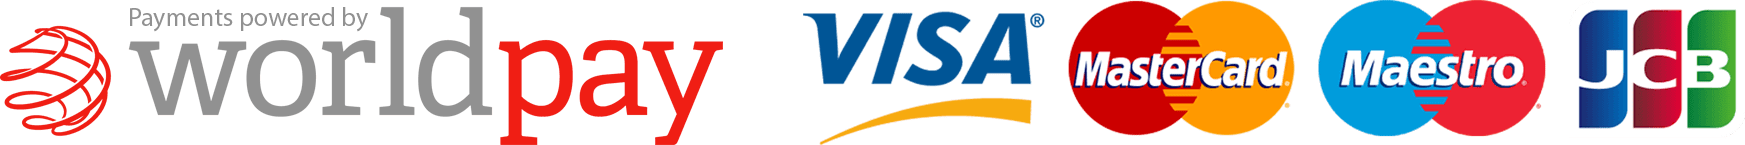 WorldPay Payments accepted with Visa, MasterCard, Maestro and JCB